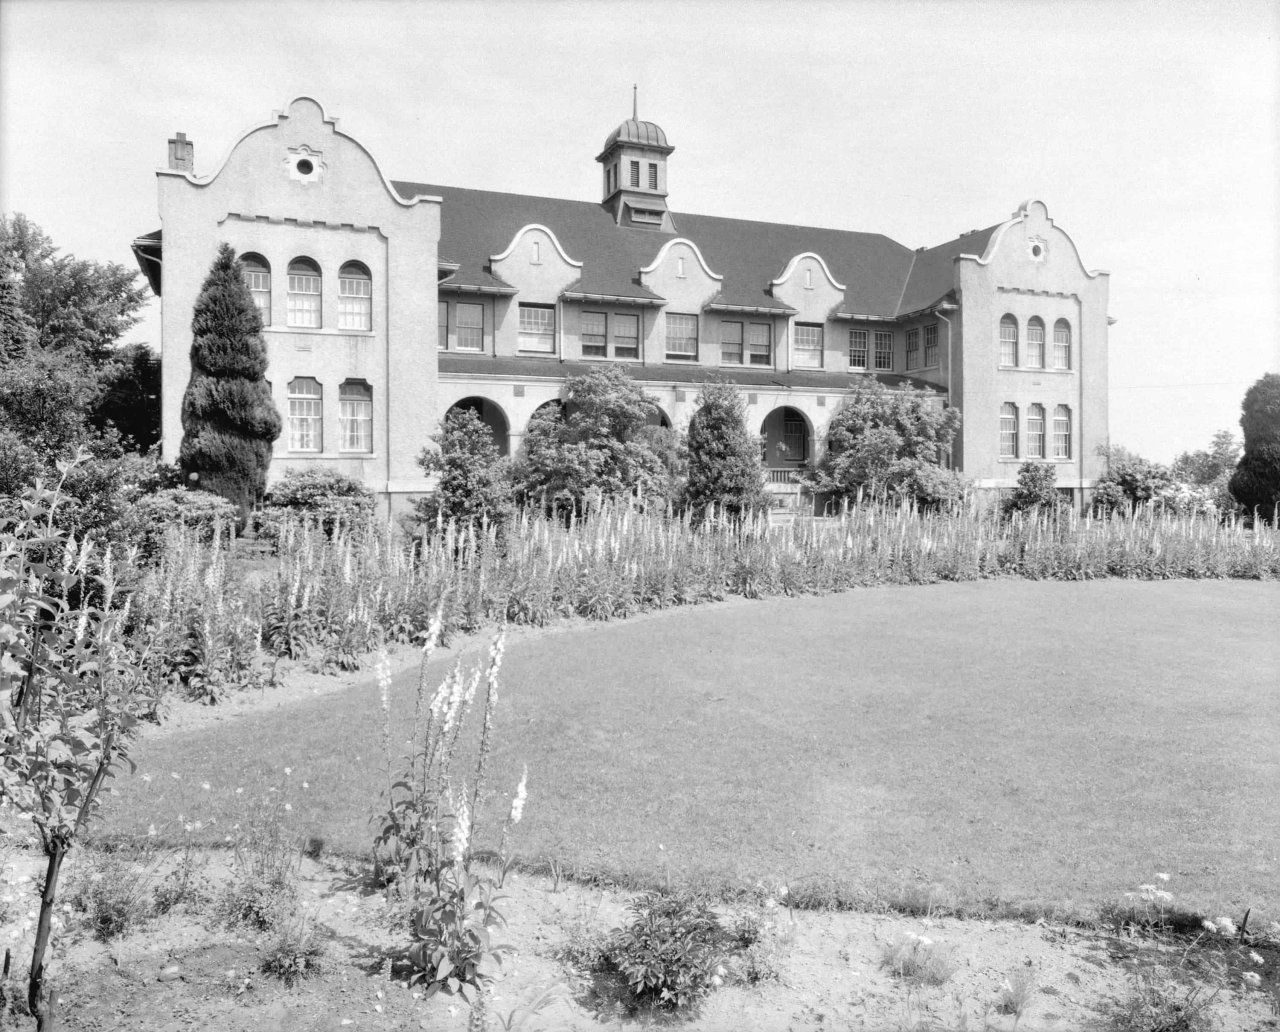 Girls Industrial School [and Grounds] at 868 Cassiar Street in 1934. Credit: City of Vancouver Archives 99-4421.